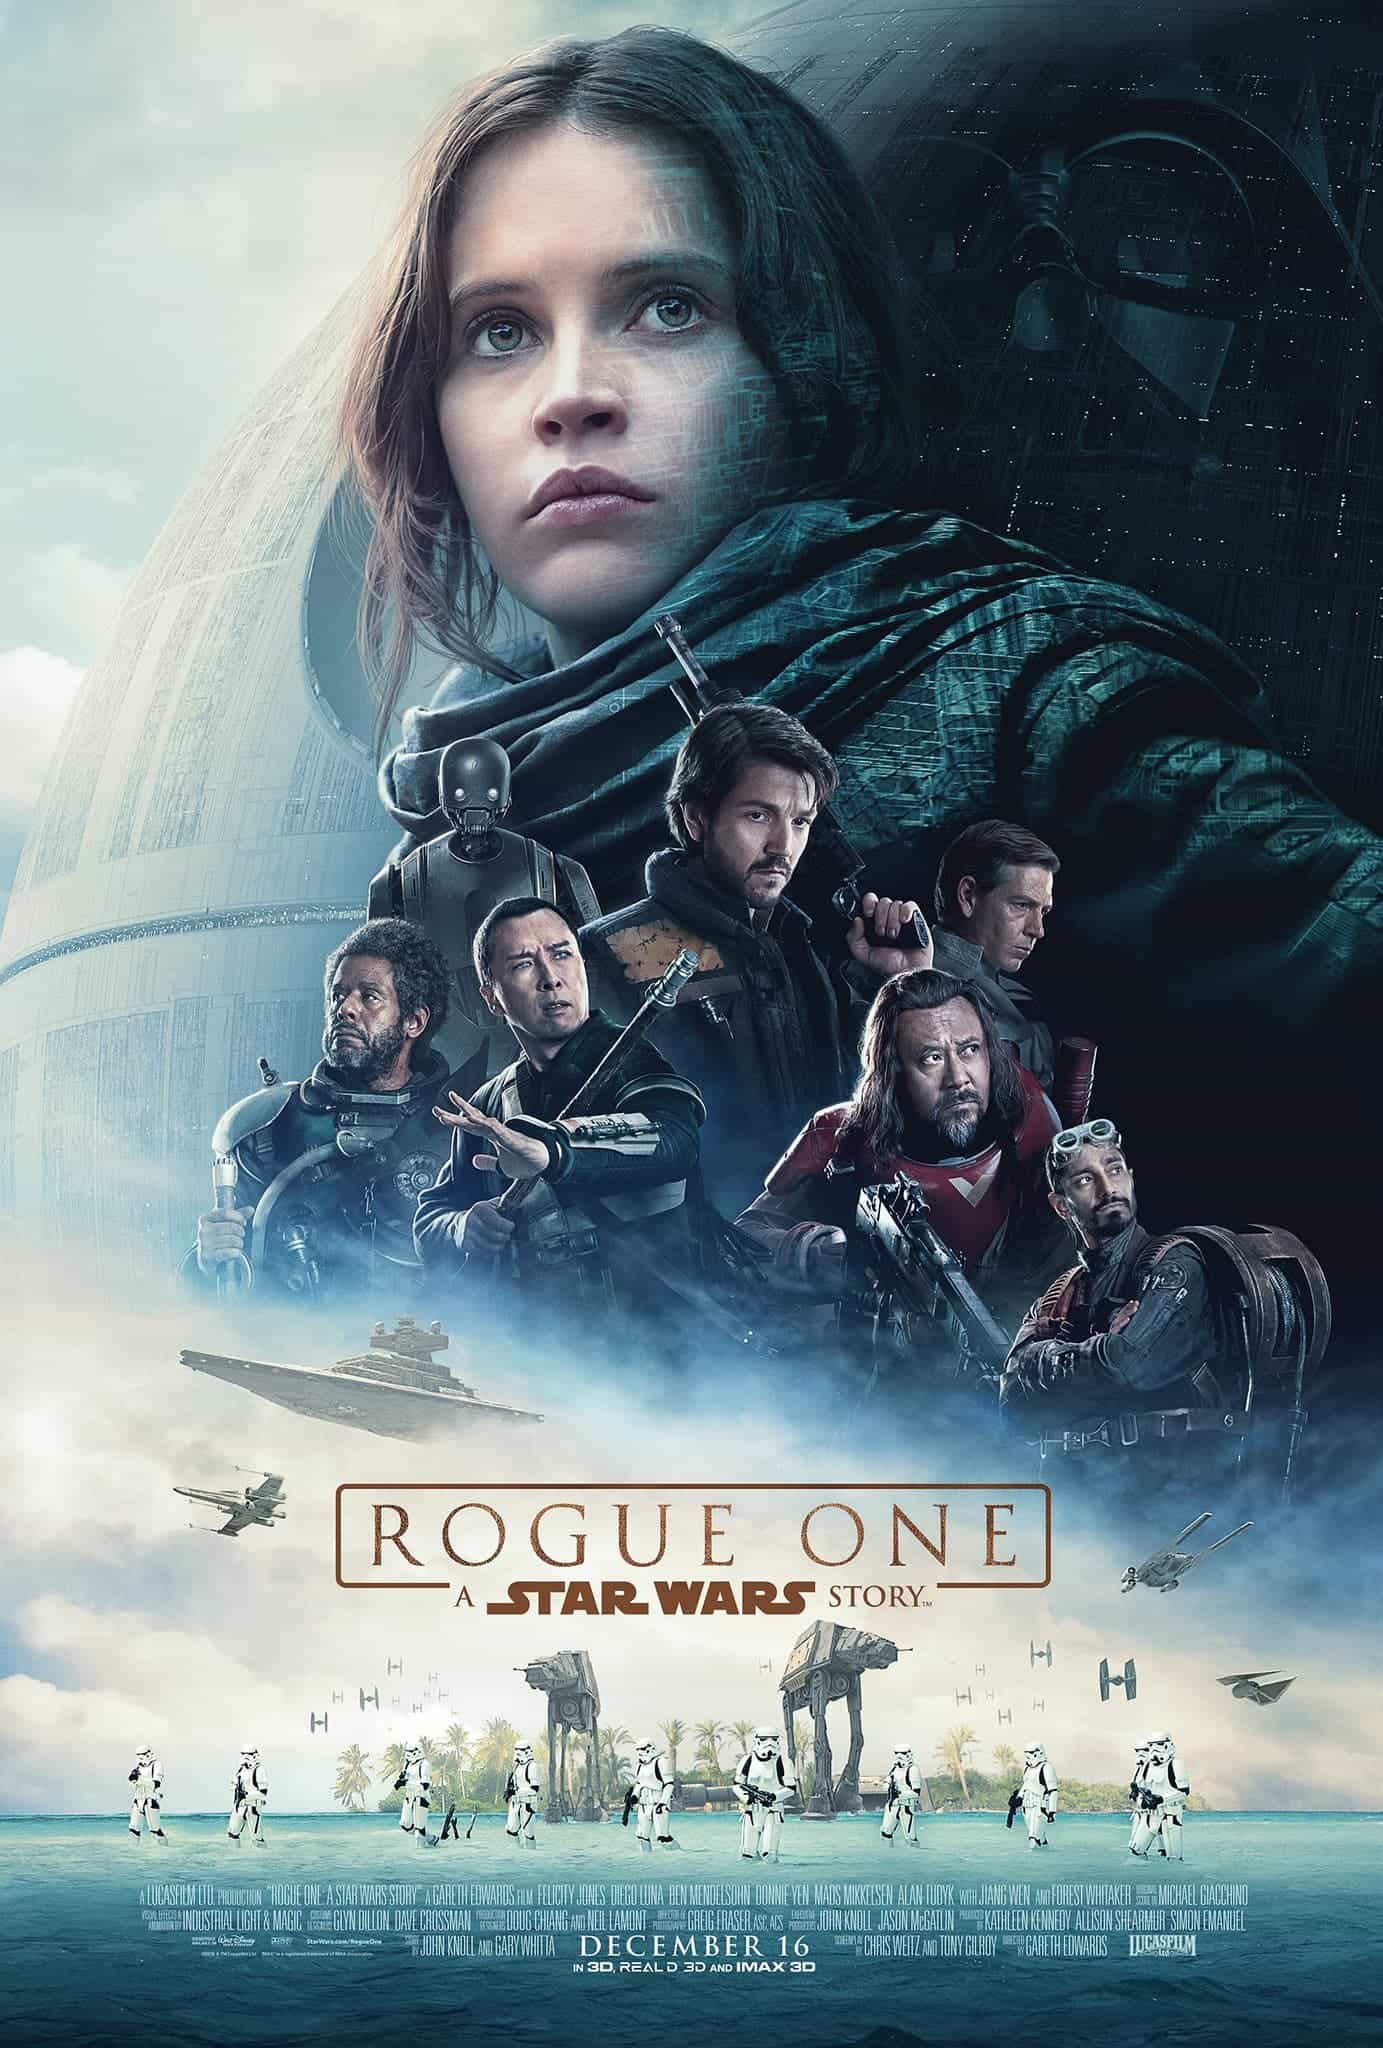 US Box Office Weekend 16th December 2016:  Rogue One opens to a massive opening weekend